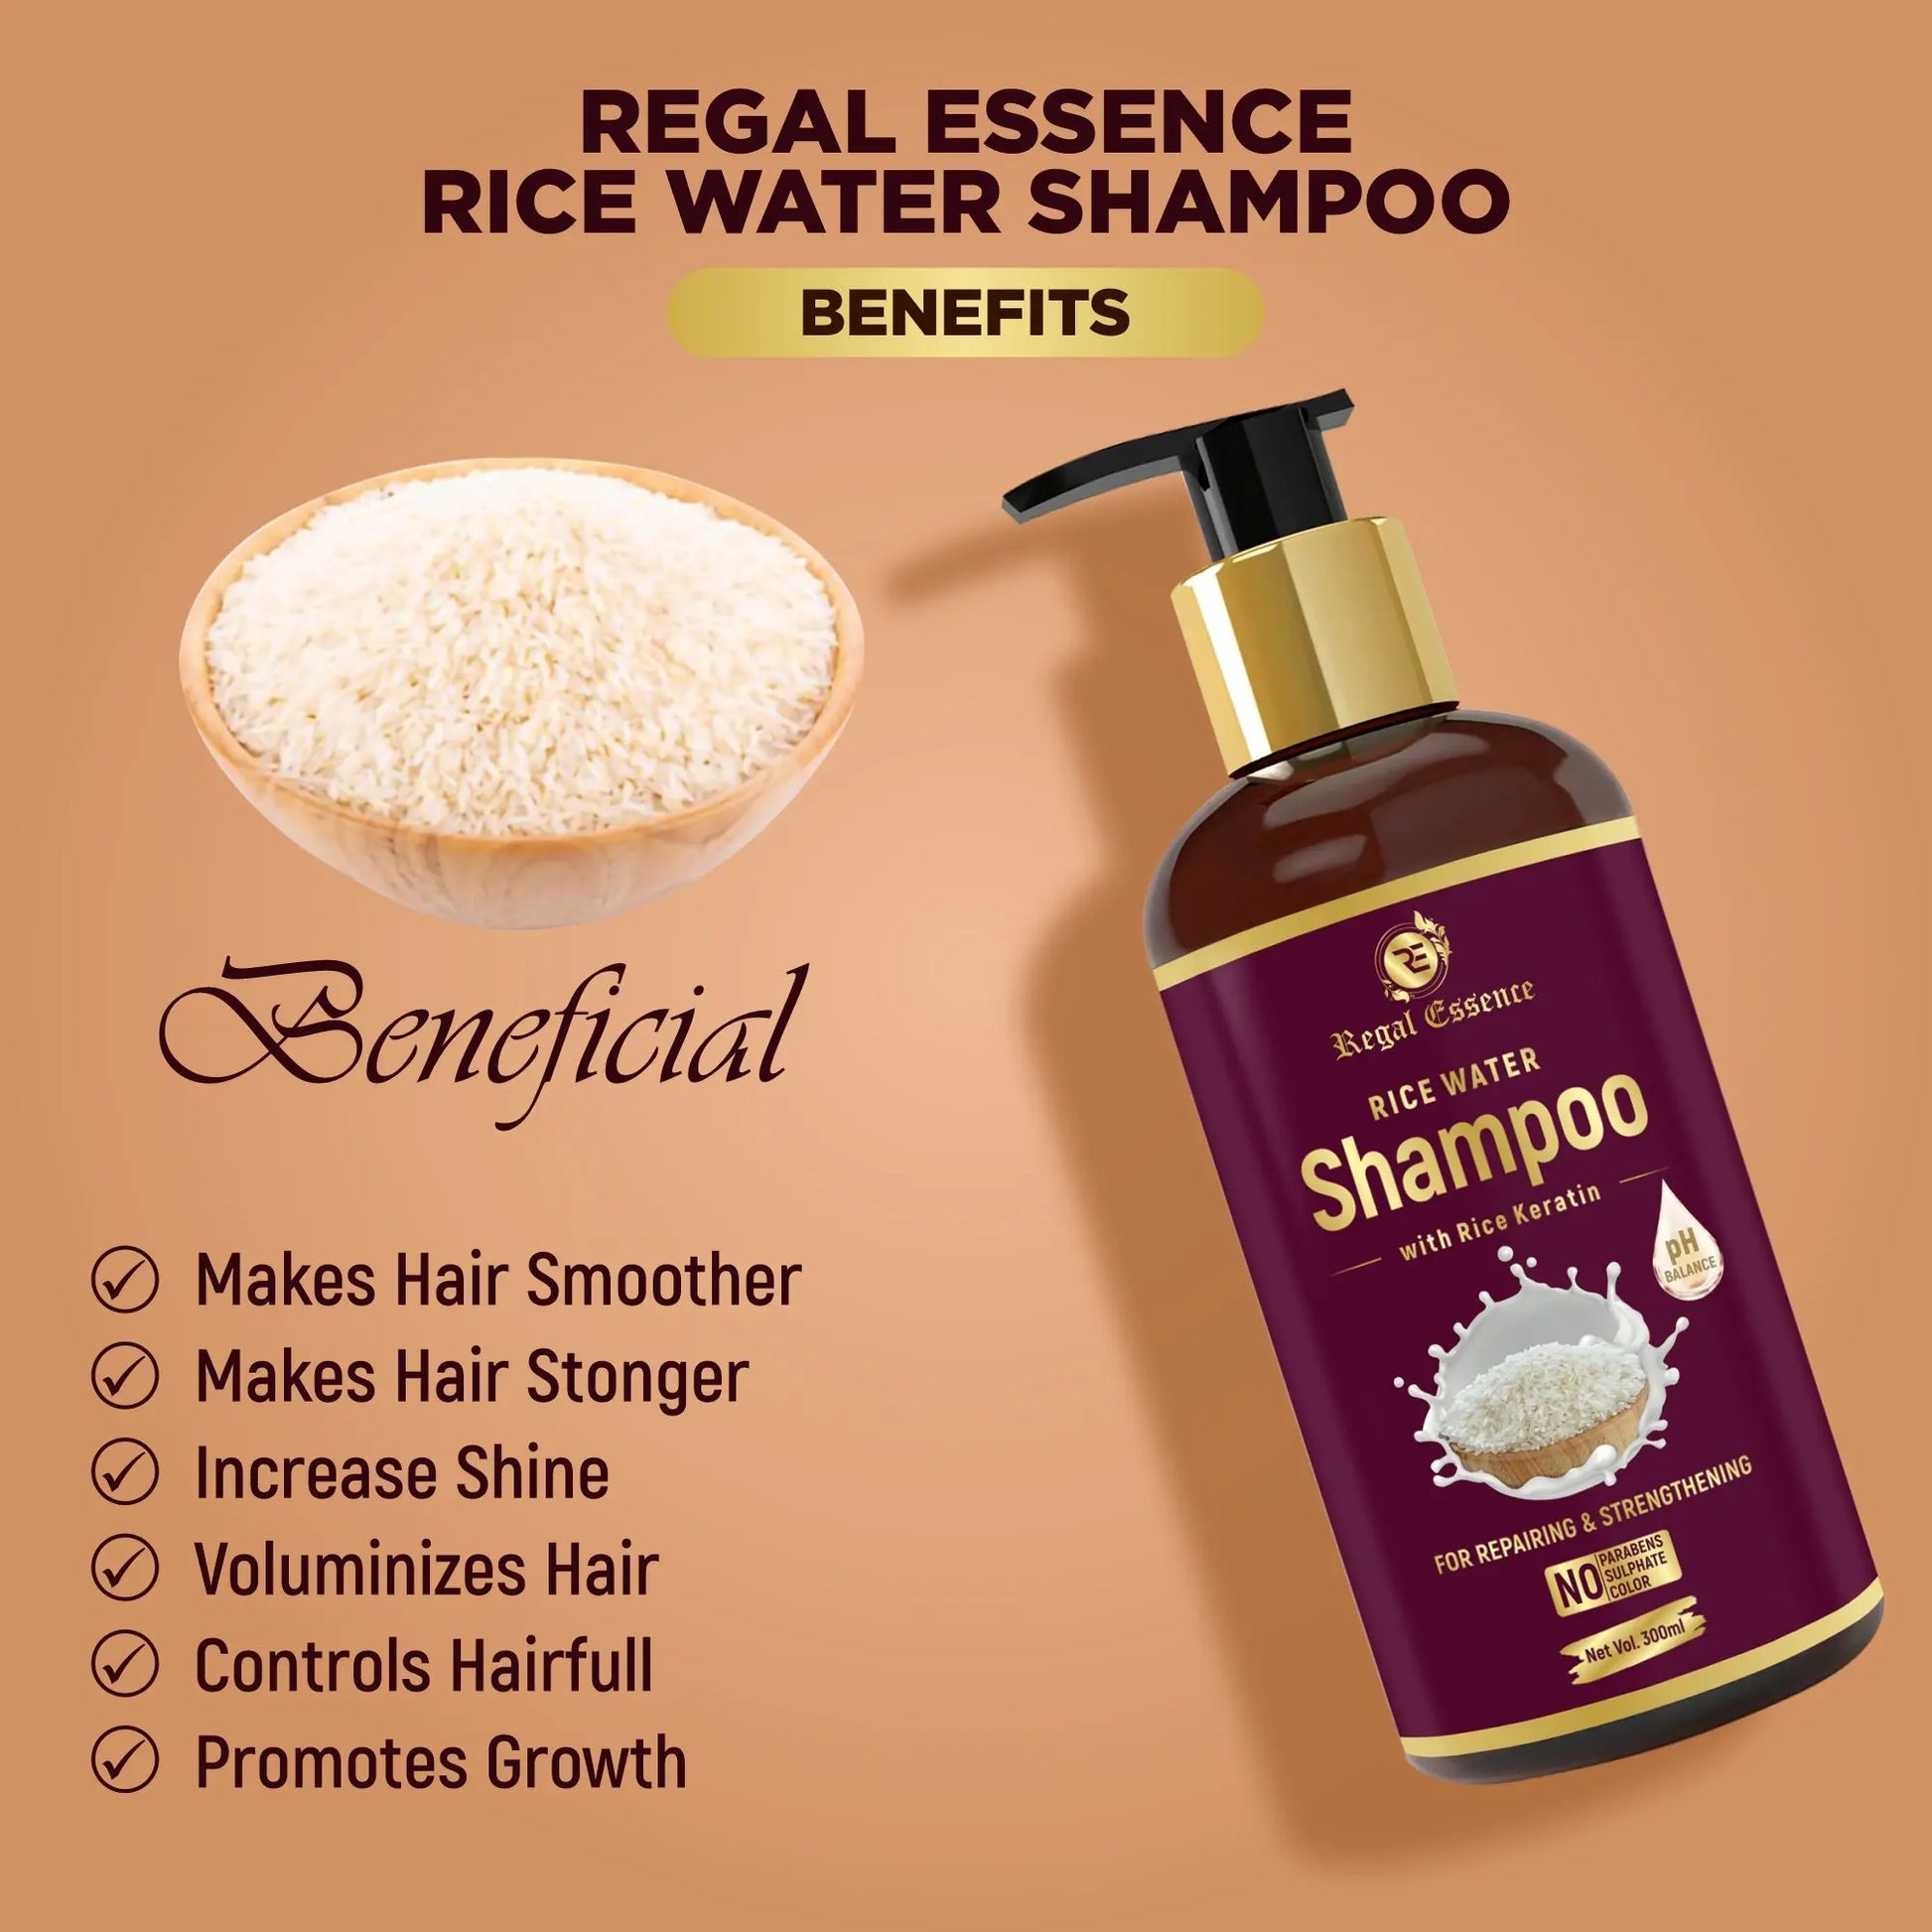 Regal Essence Rice Water Shampoo With Rice Keratin For Damaged, Dry & Frizzy Hair (300 ml) VedapureNaturals